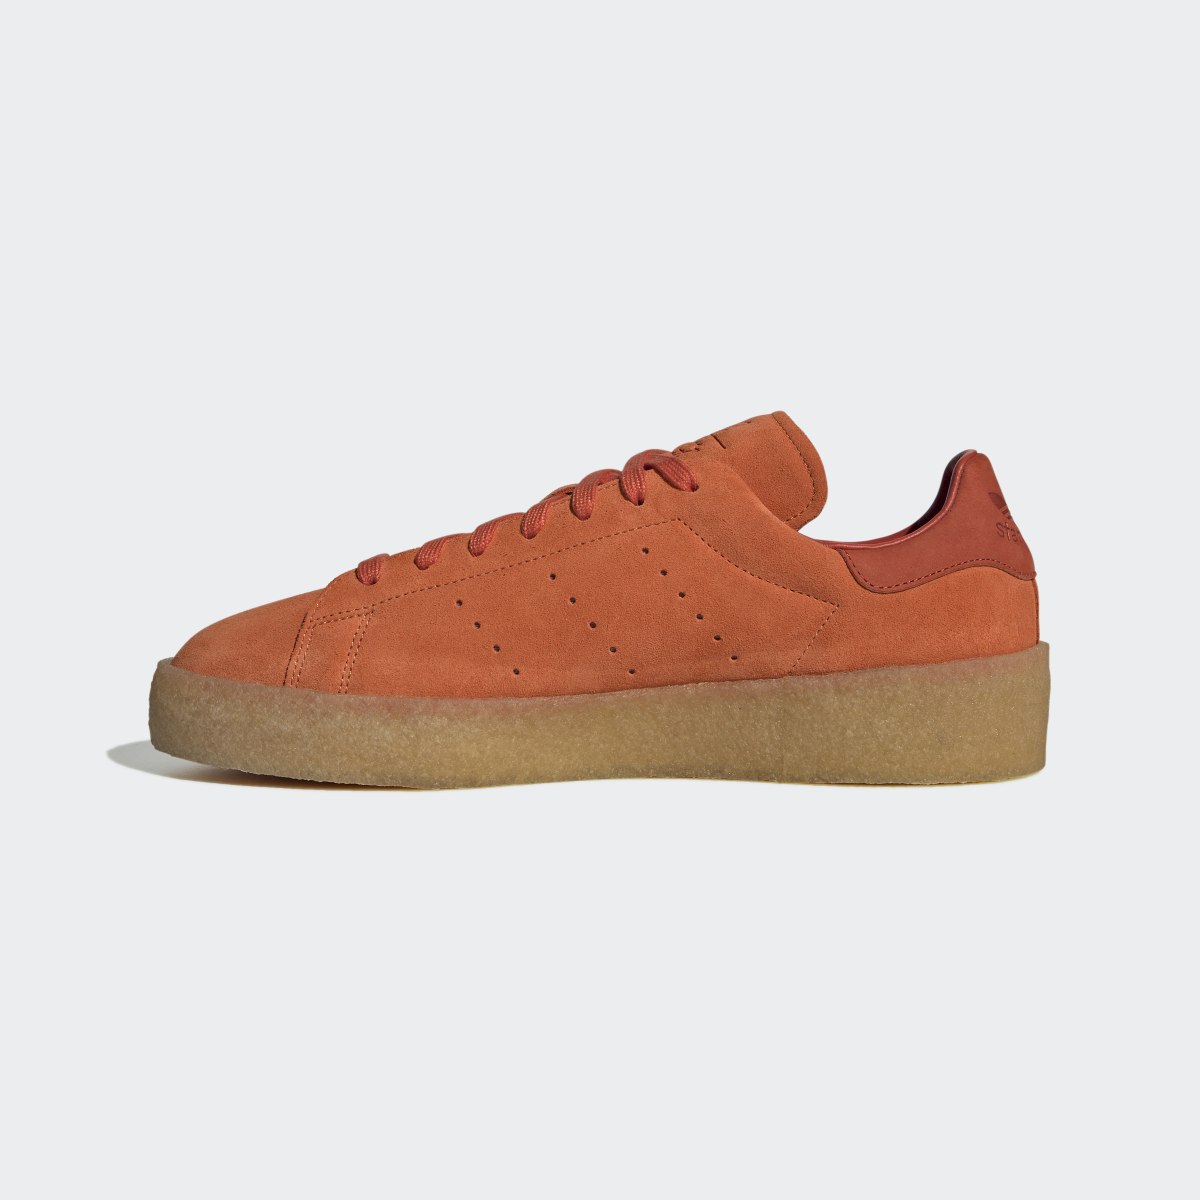 Adidas Stan Smith Crepe Shoes. 7